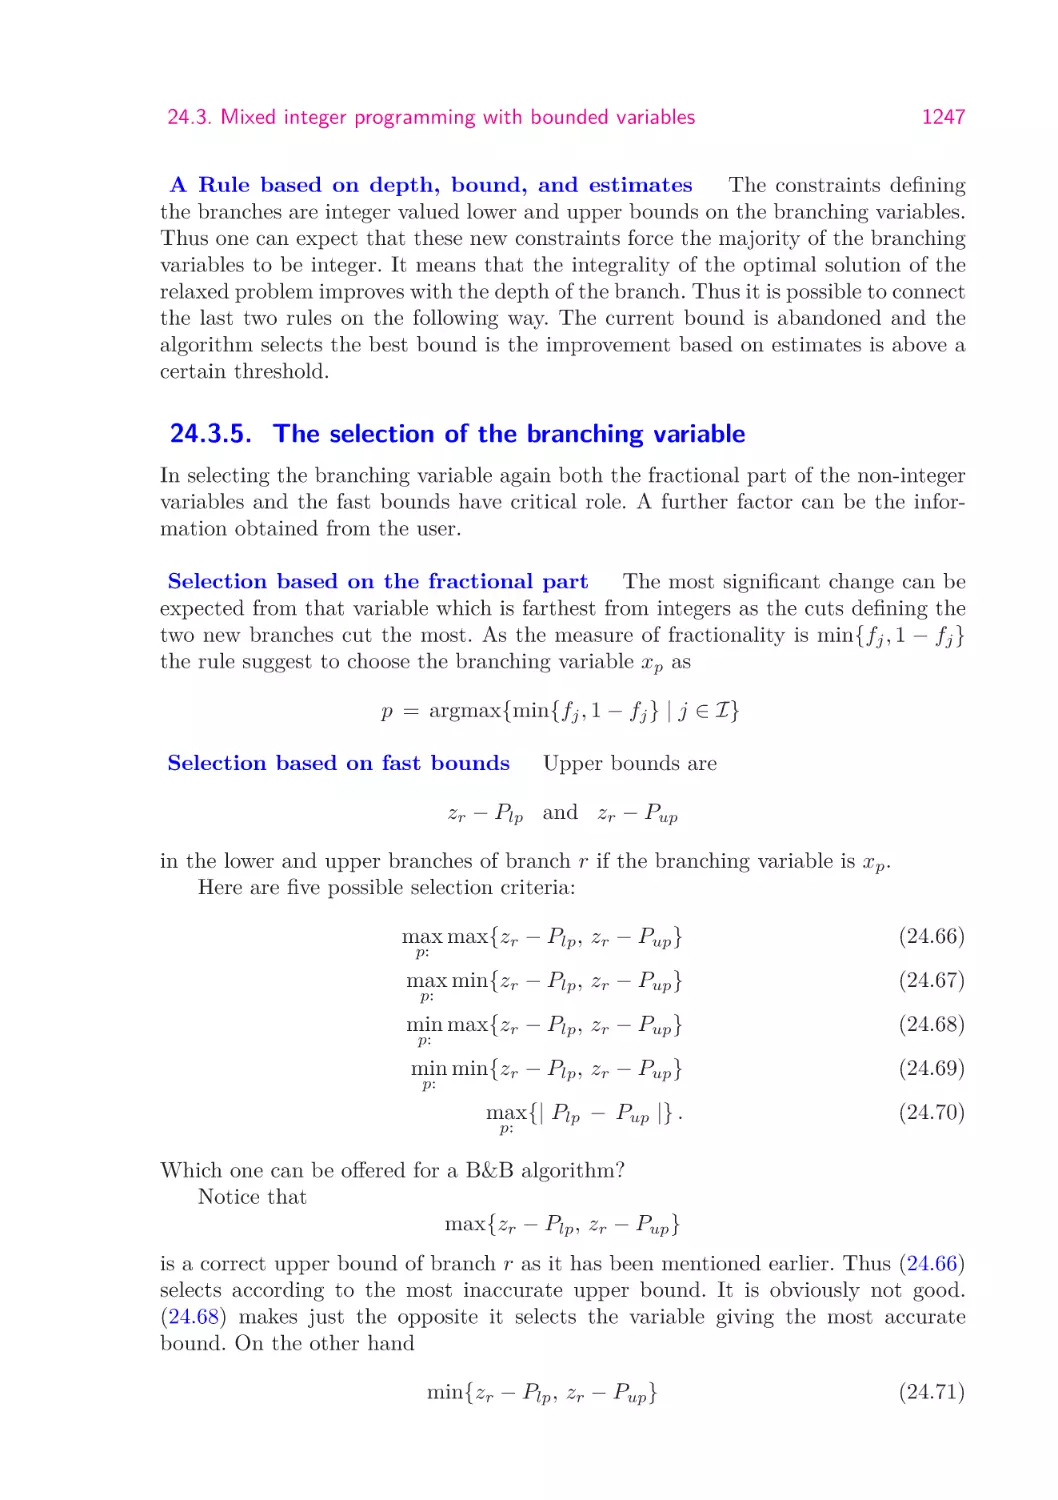 24.3.5.  The selection of the branching variable